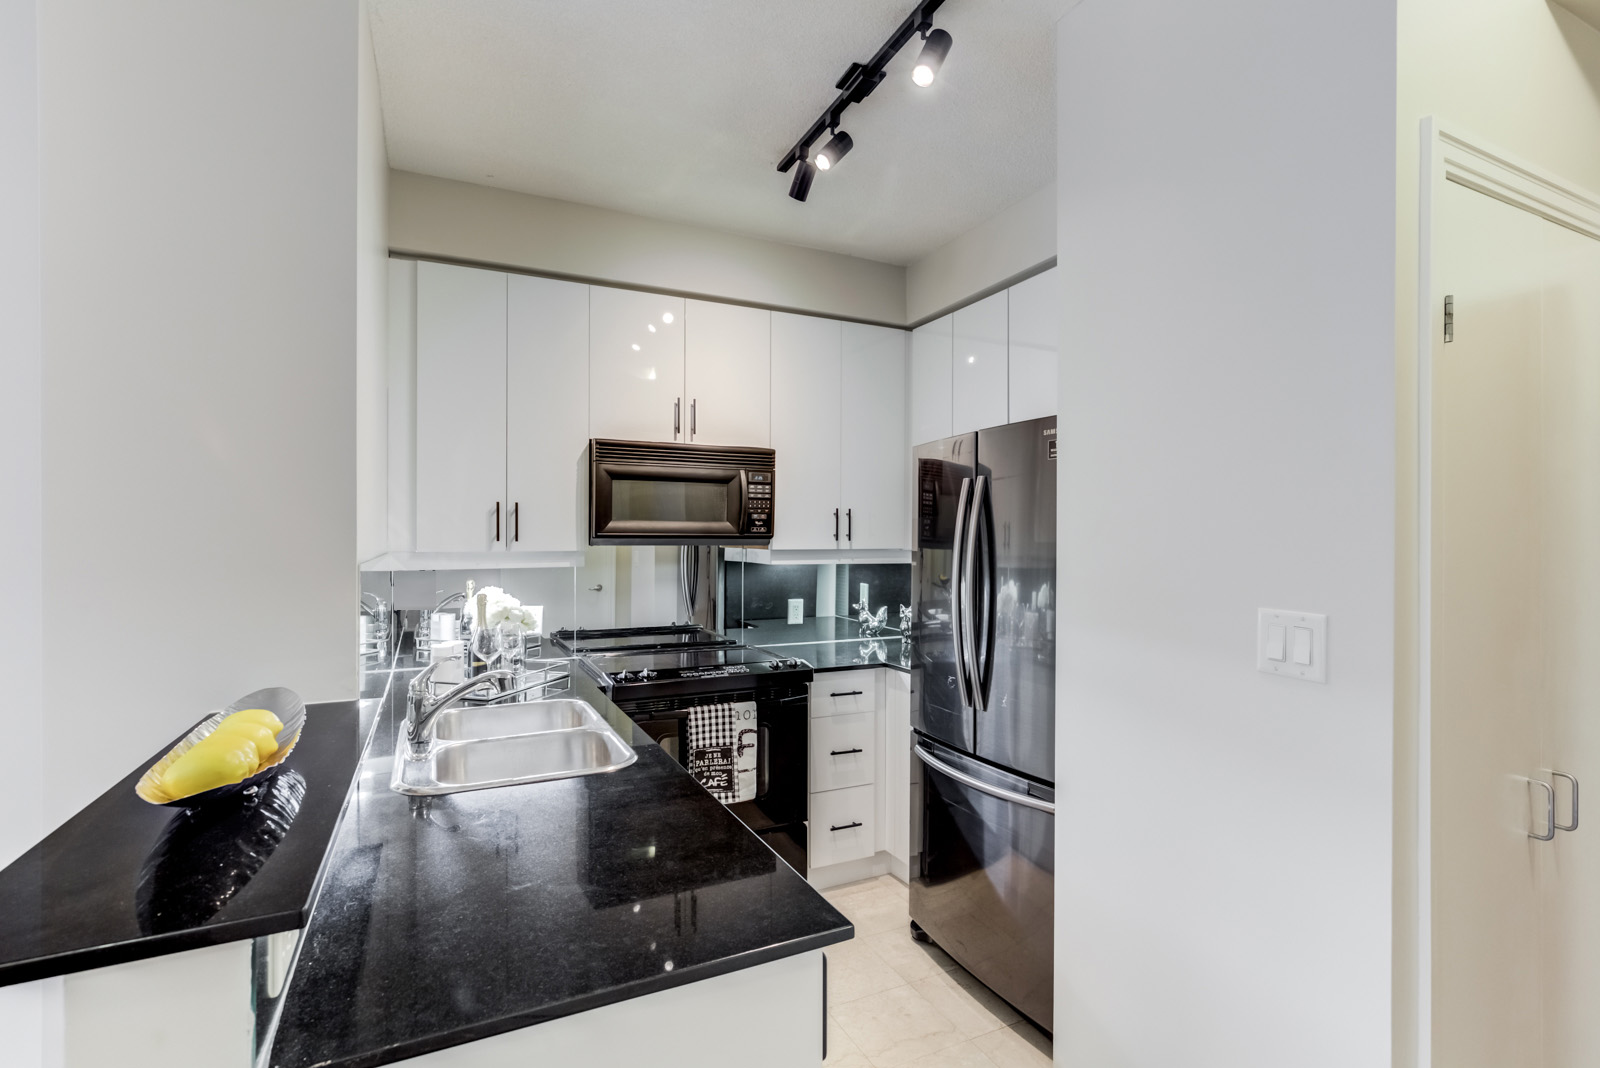 Shiny black granite counters, sleek white cabinets, black appliances and track-lights.